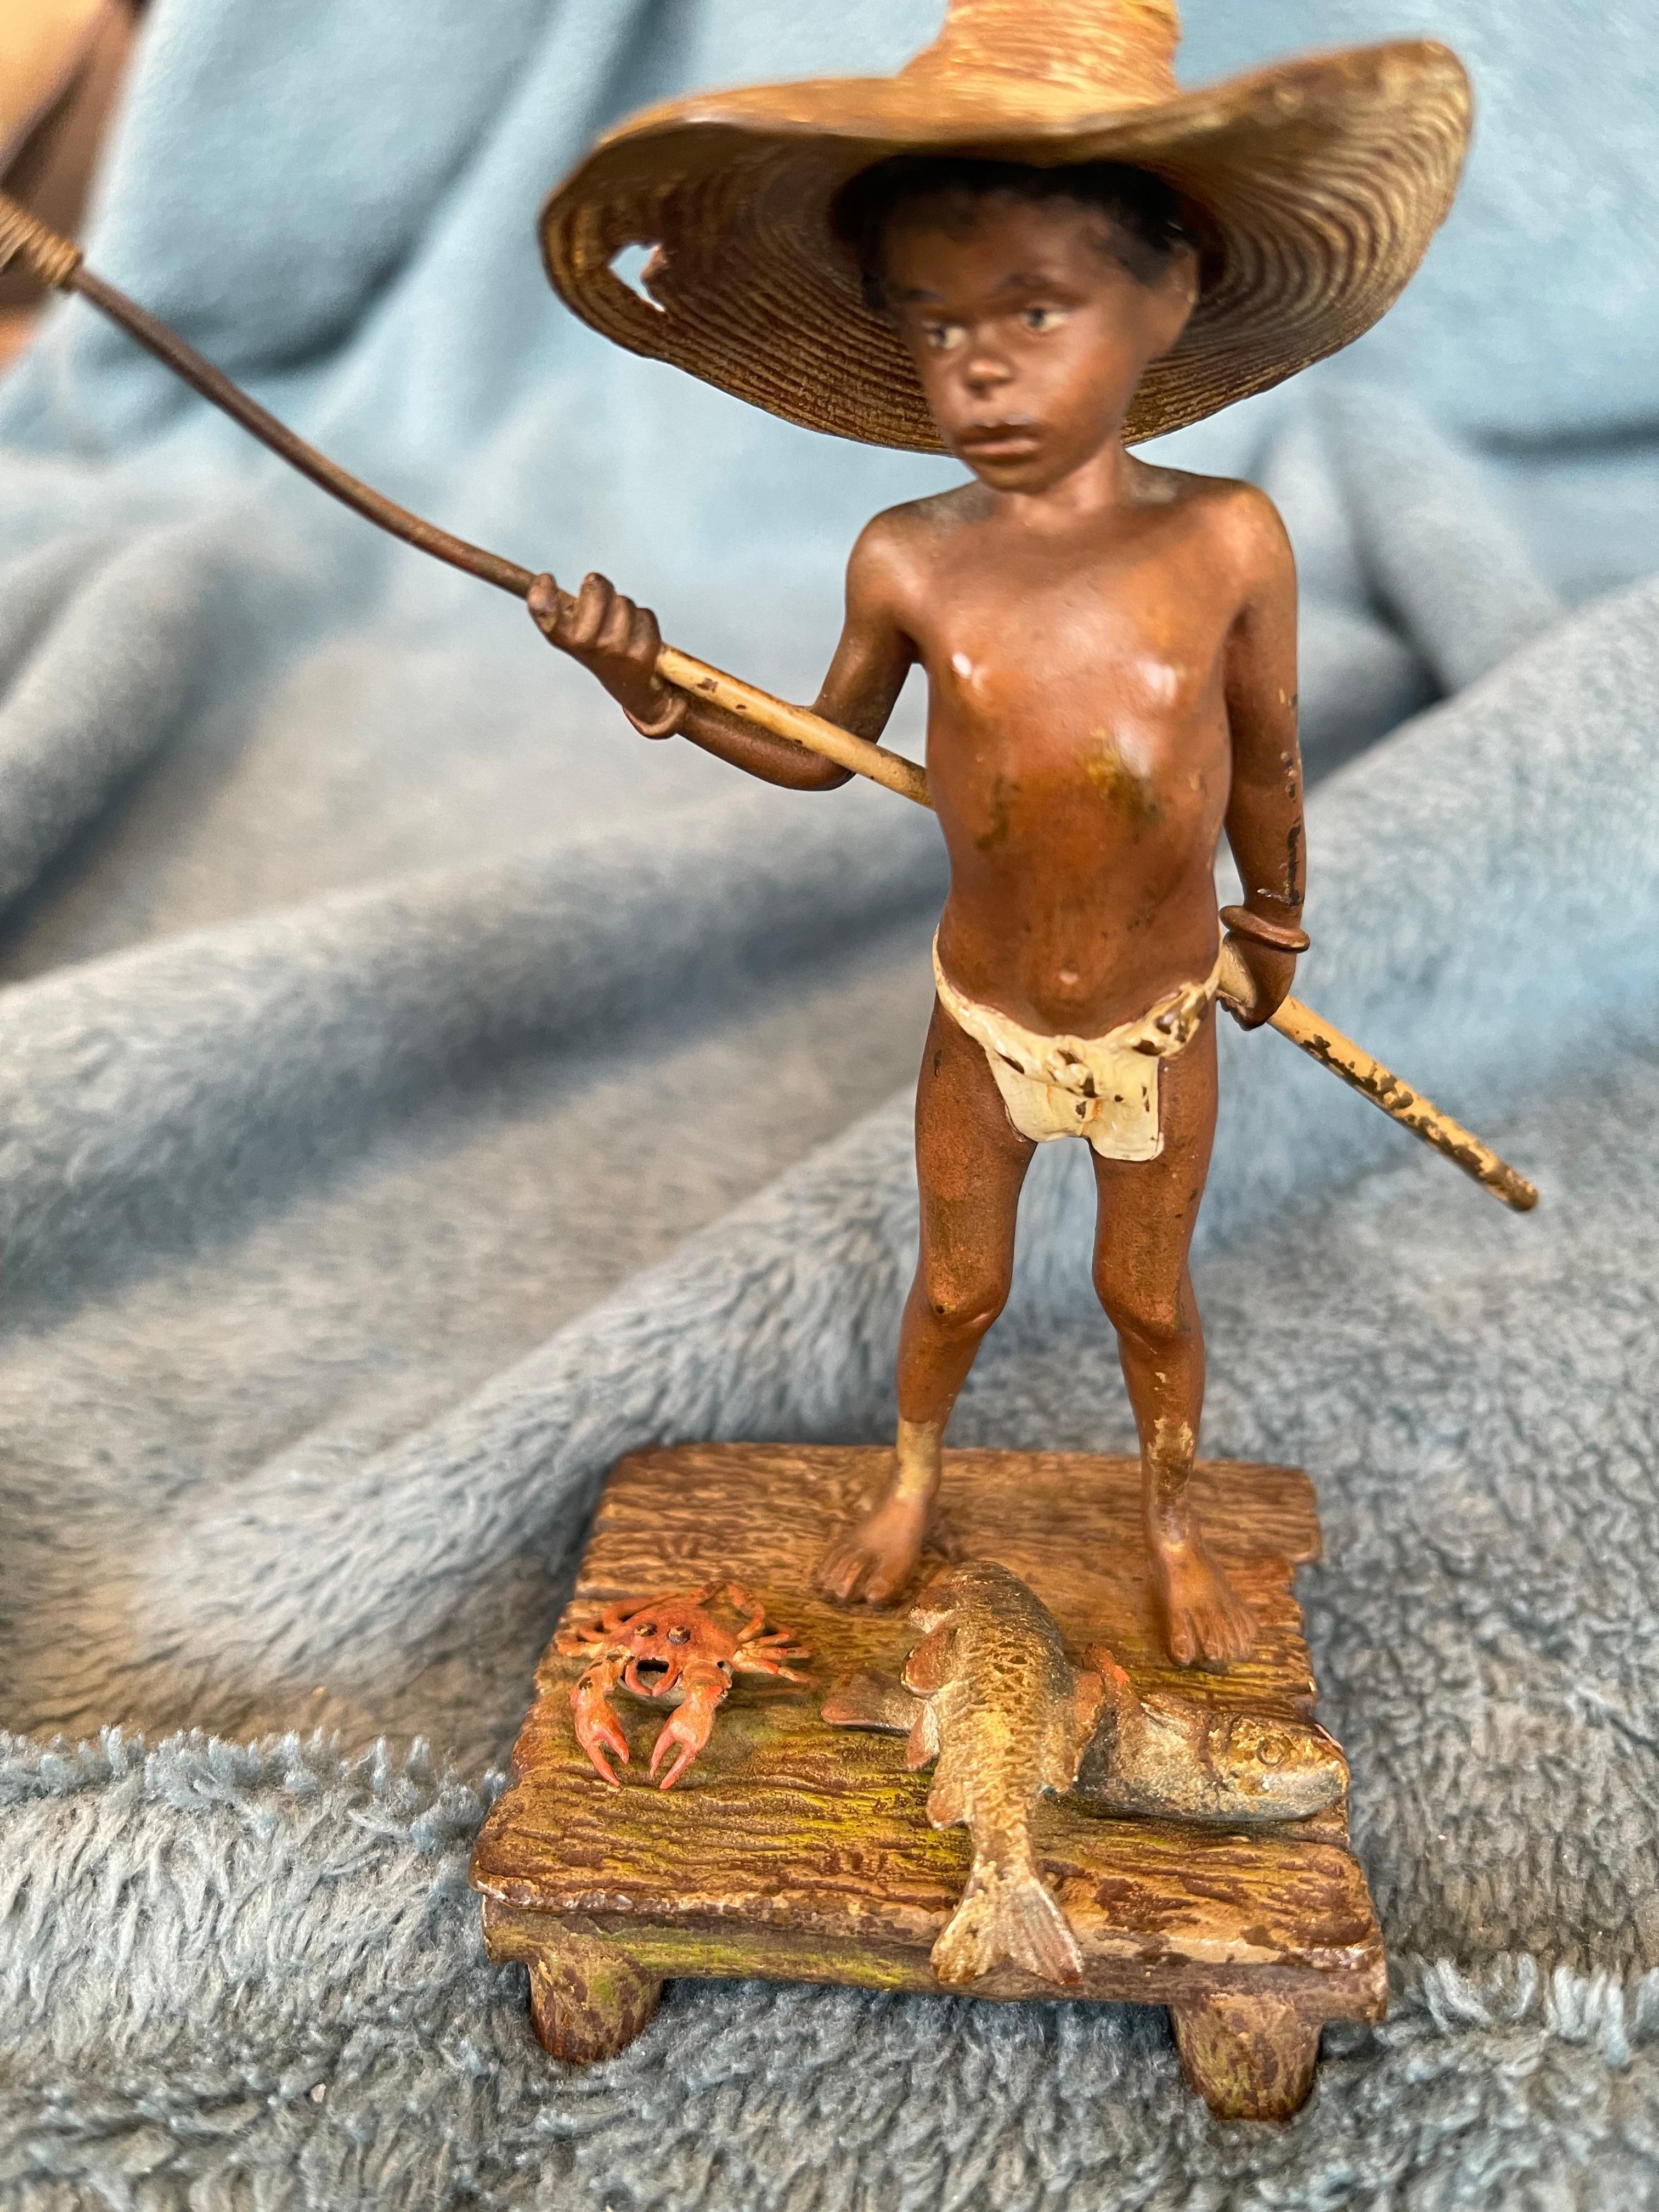   We just bought a large collection of Orientalist sculpture by the Bergmann Foundry, while unsigned, we guarantee it is his work. This may be the cutest, most fun piece of this rather nice large collection. The young boy is standing on a wooden